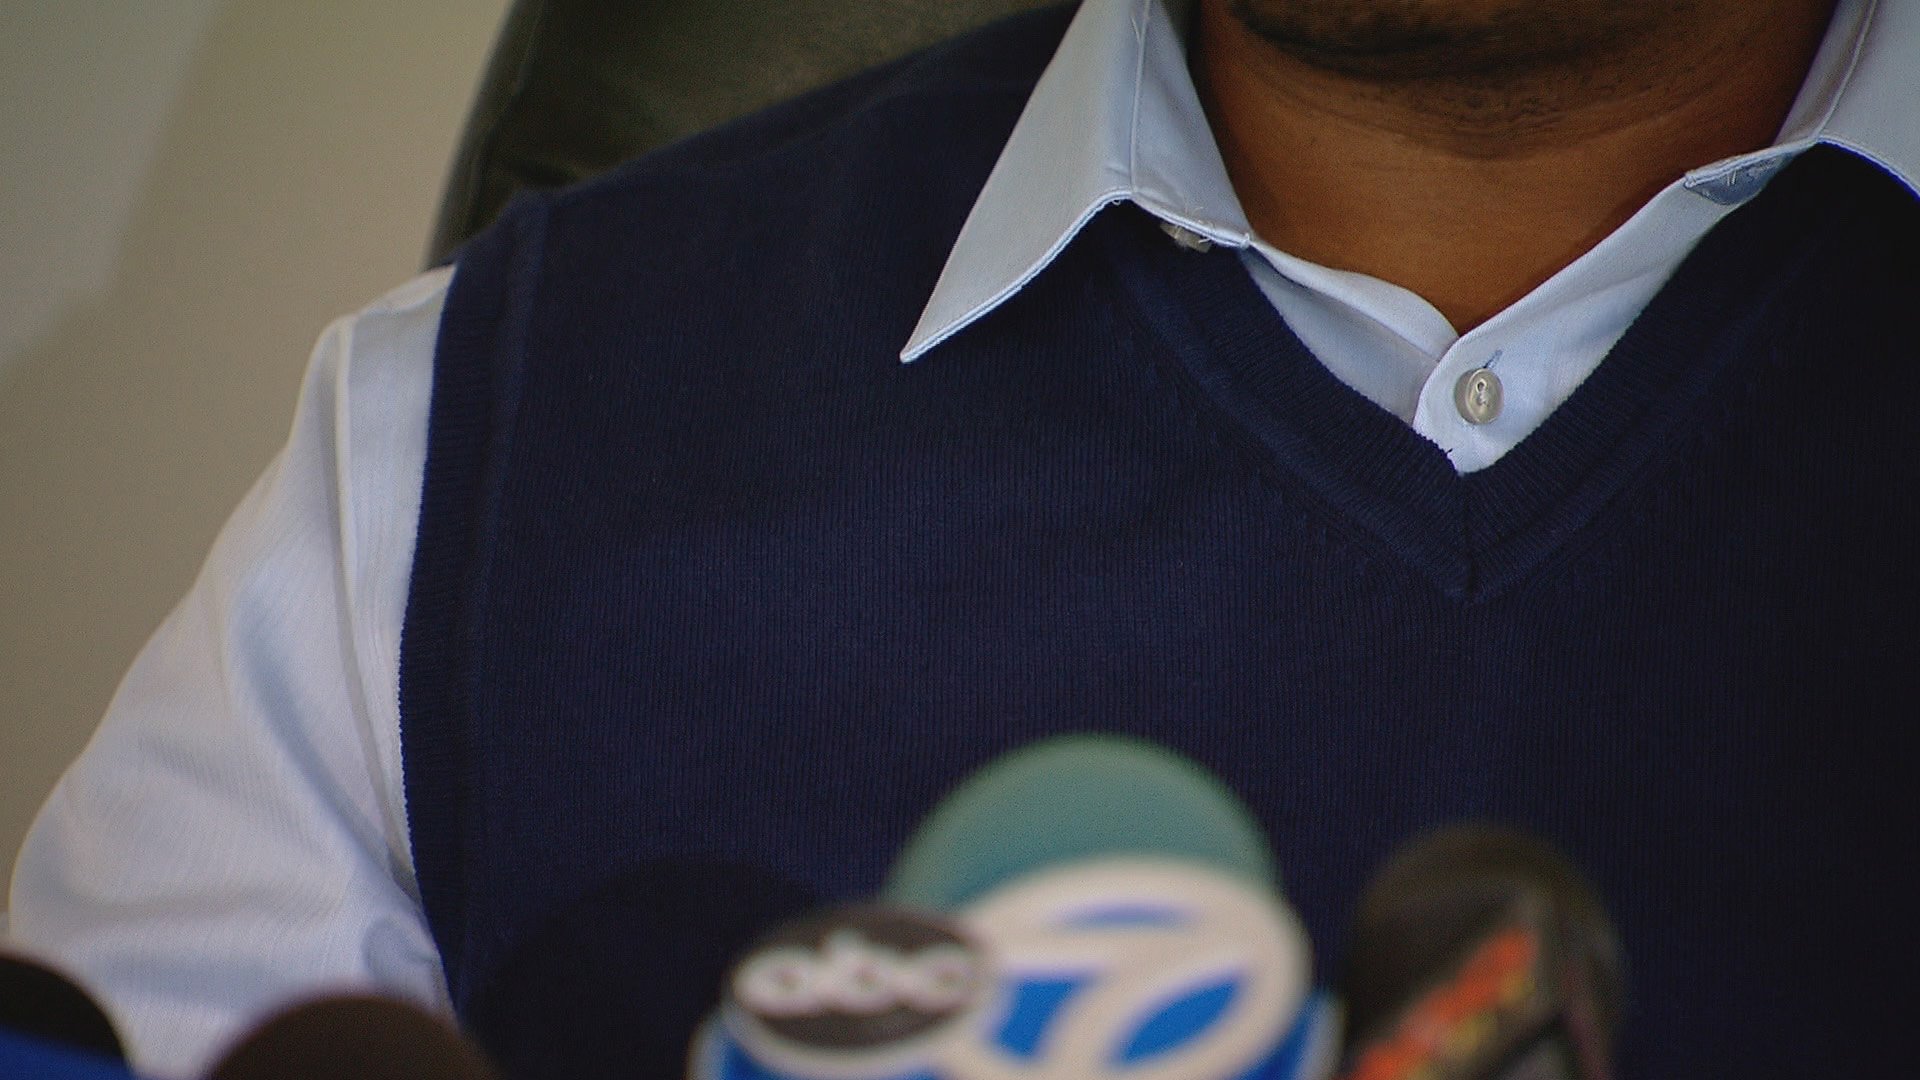 A former Chicago Public Schools student who claims he was sexually assaulted for years by a school employee filed a lawsuit this week against the Board of Education. (Chicago Tonight)